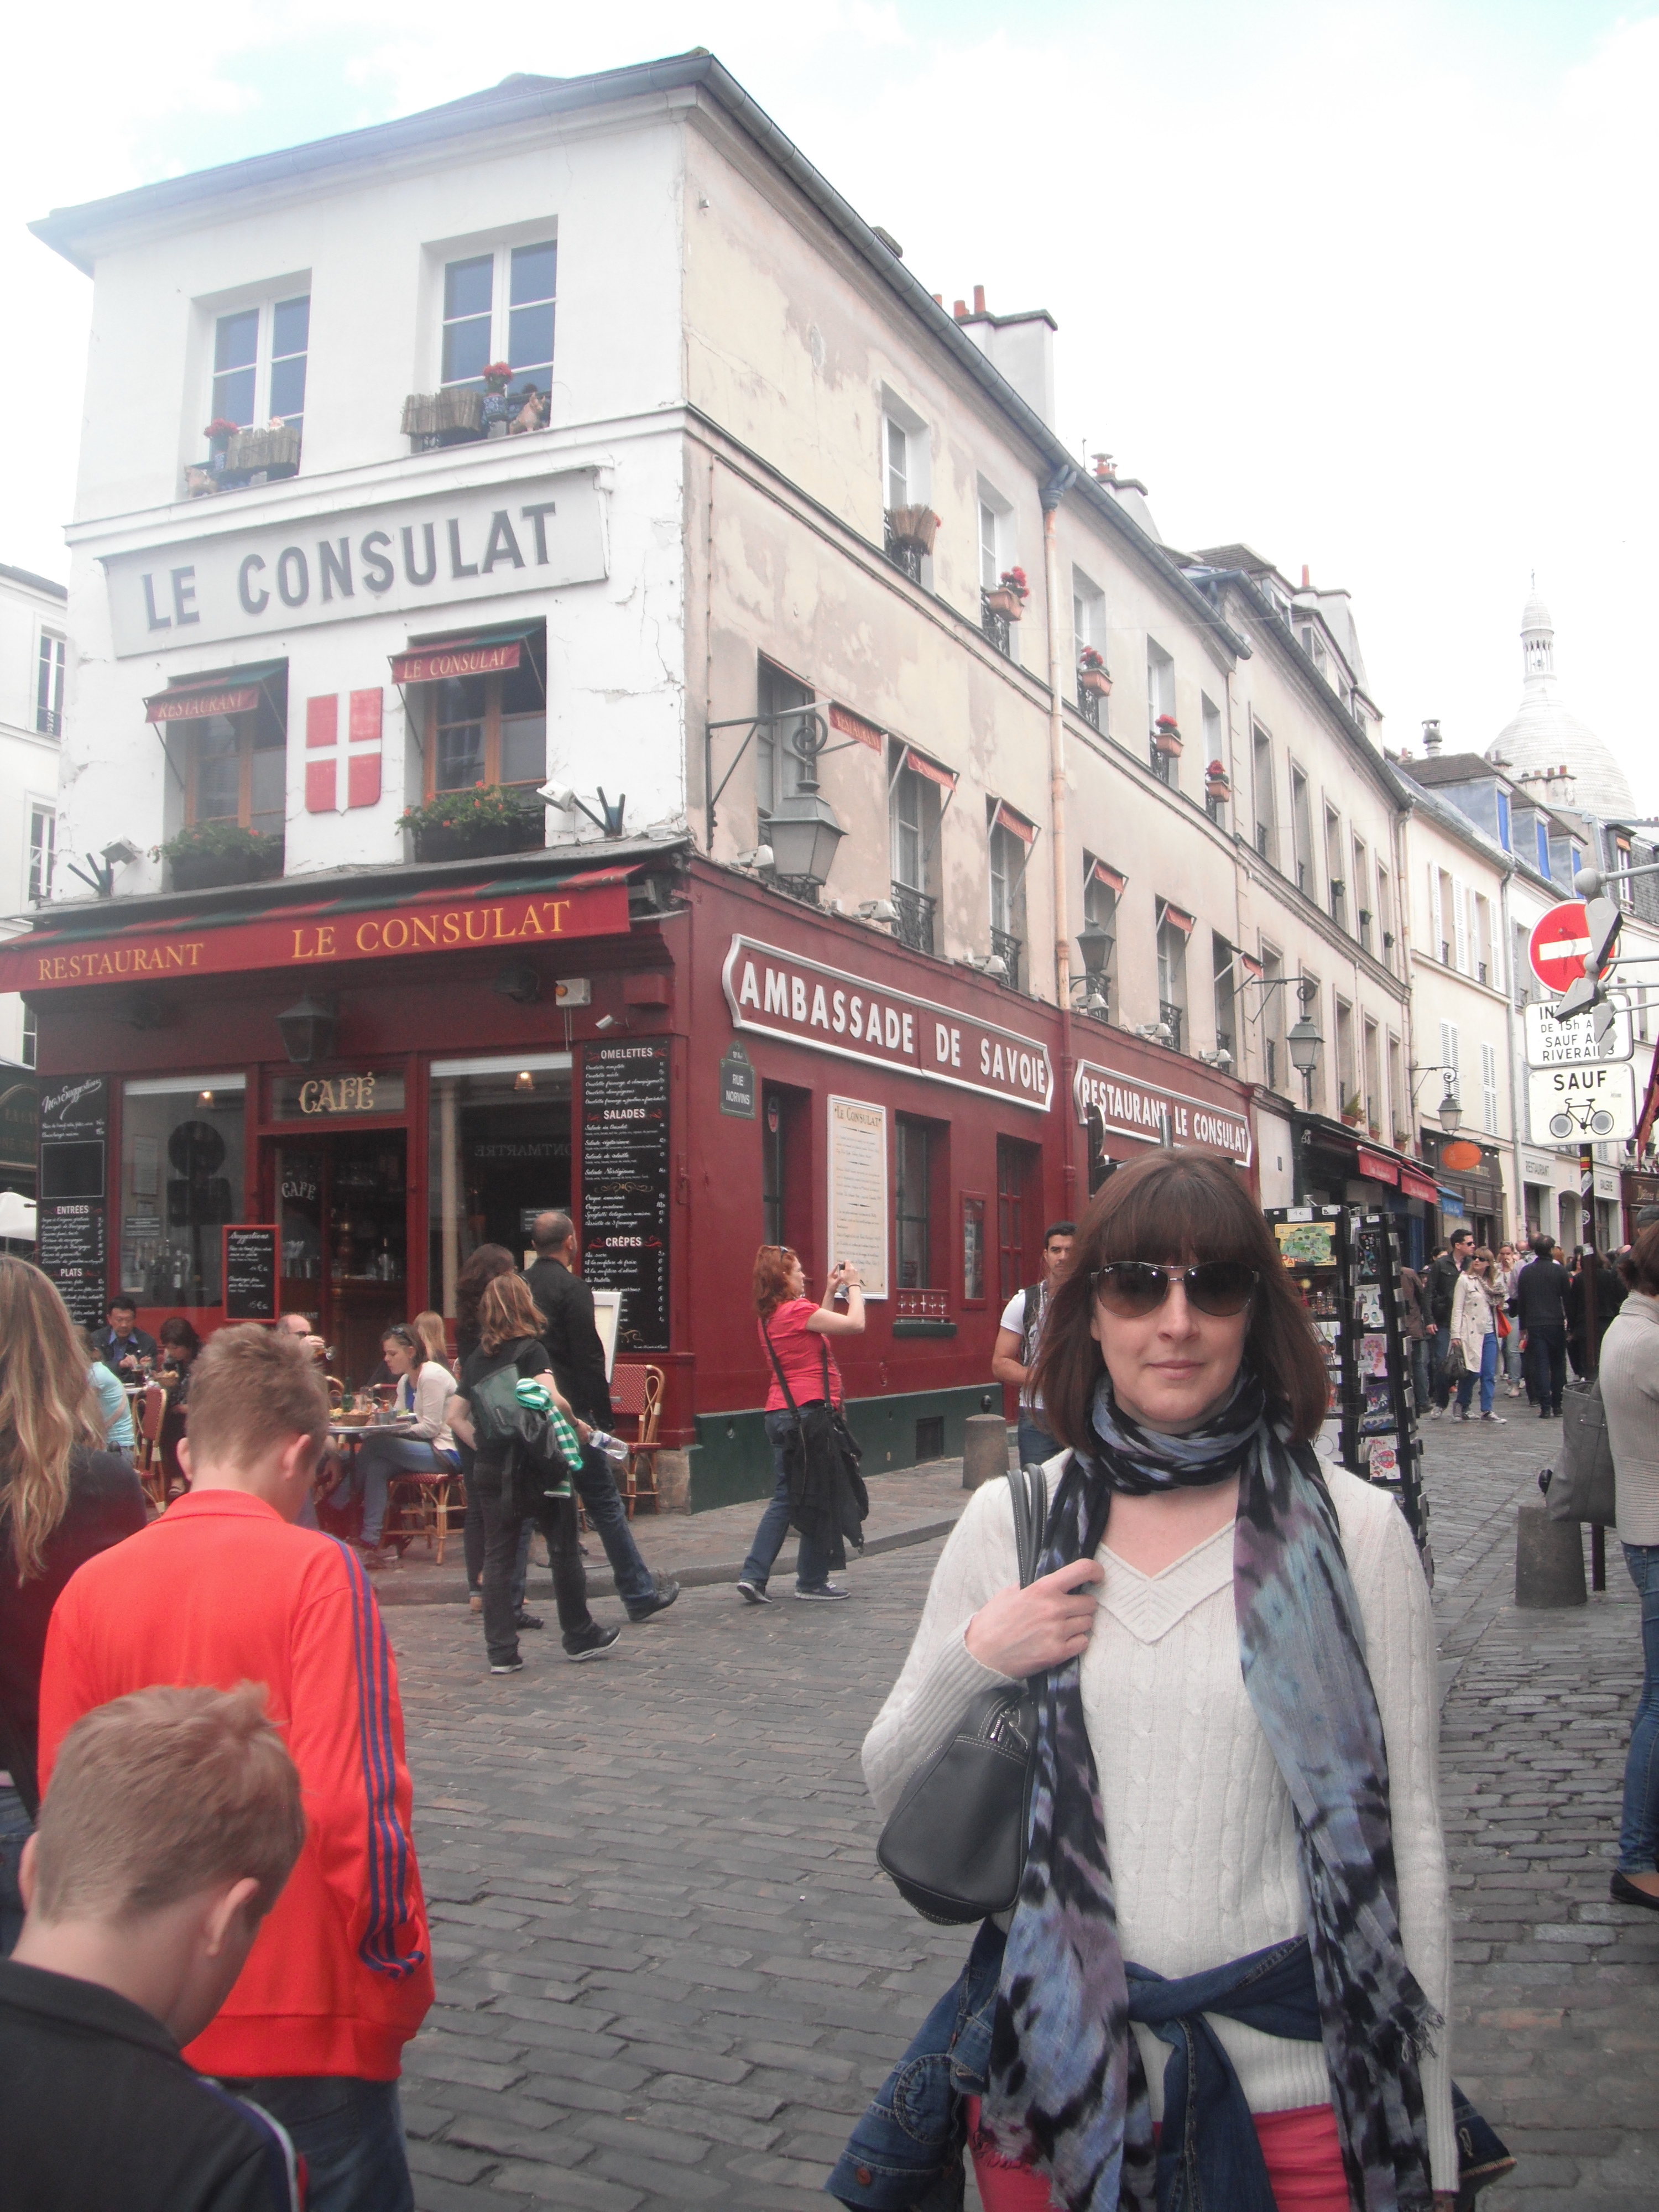 This is me in Montmartre where the Sacre Coeur church is. Notice how I'm clutching my bag. The area is well known for pickpockets!